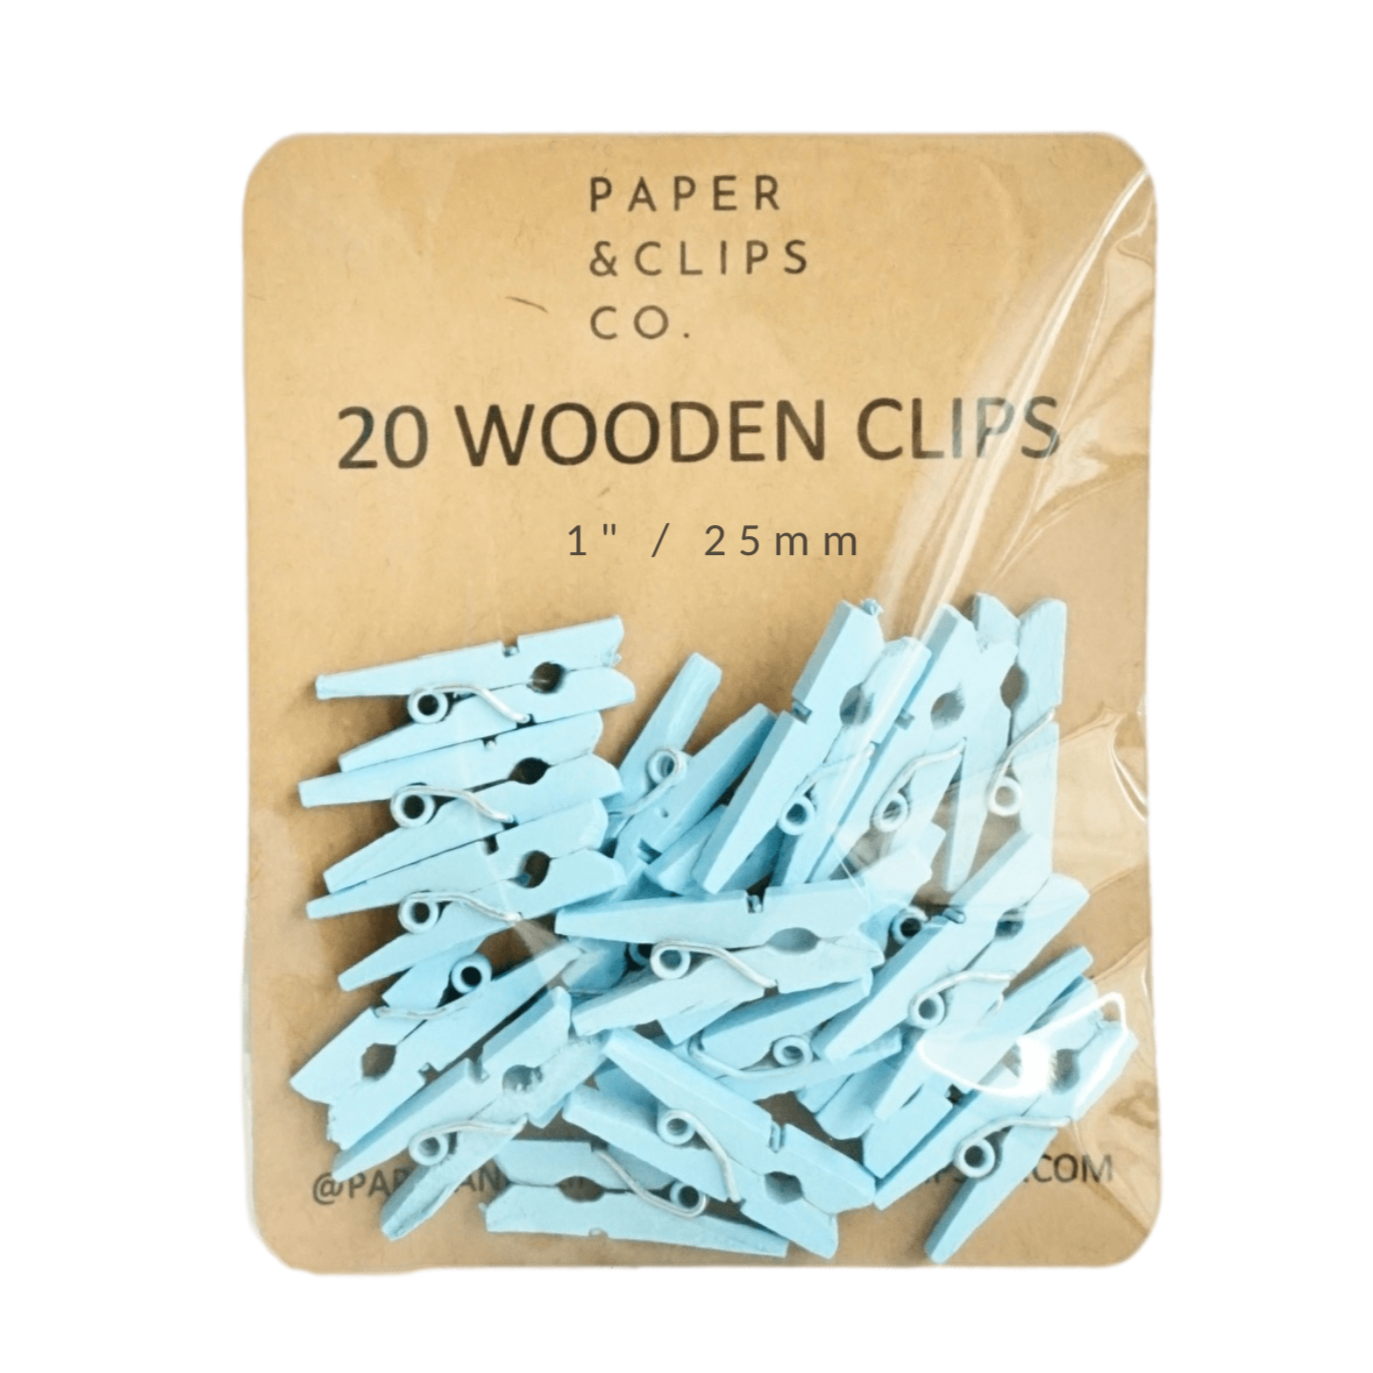 Blue Miniature Clothespins Wooden Clips